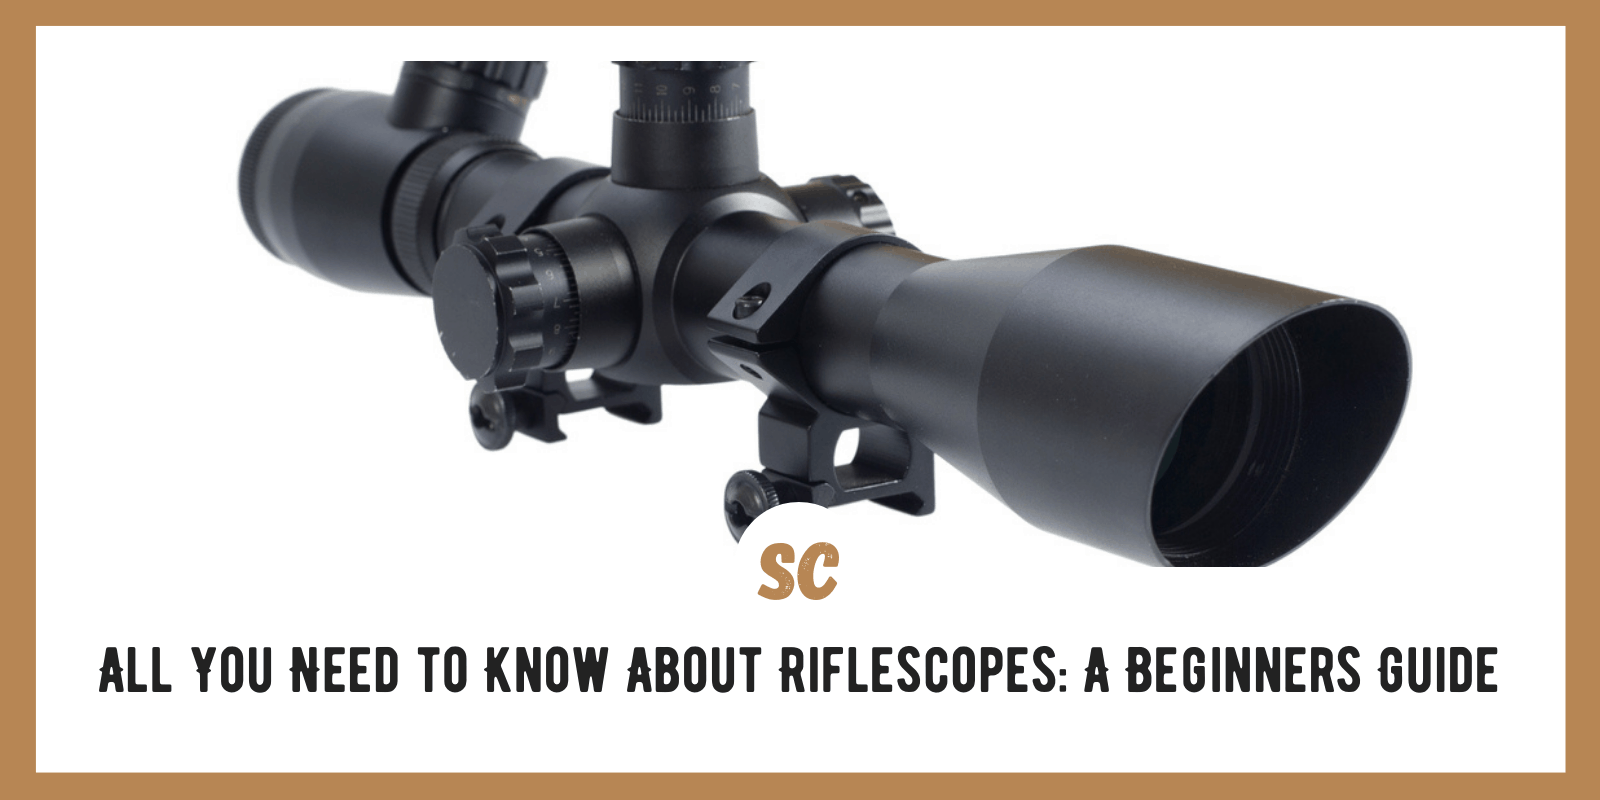 Rifle Scopes Explained: A Beginner’s Guide